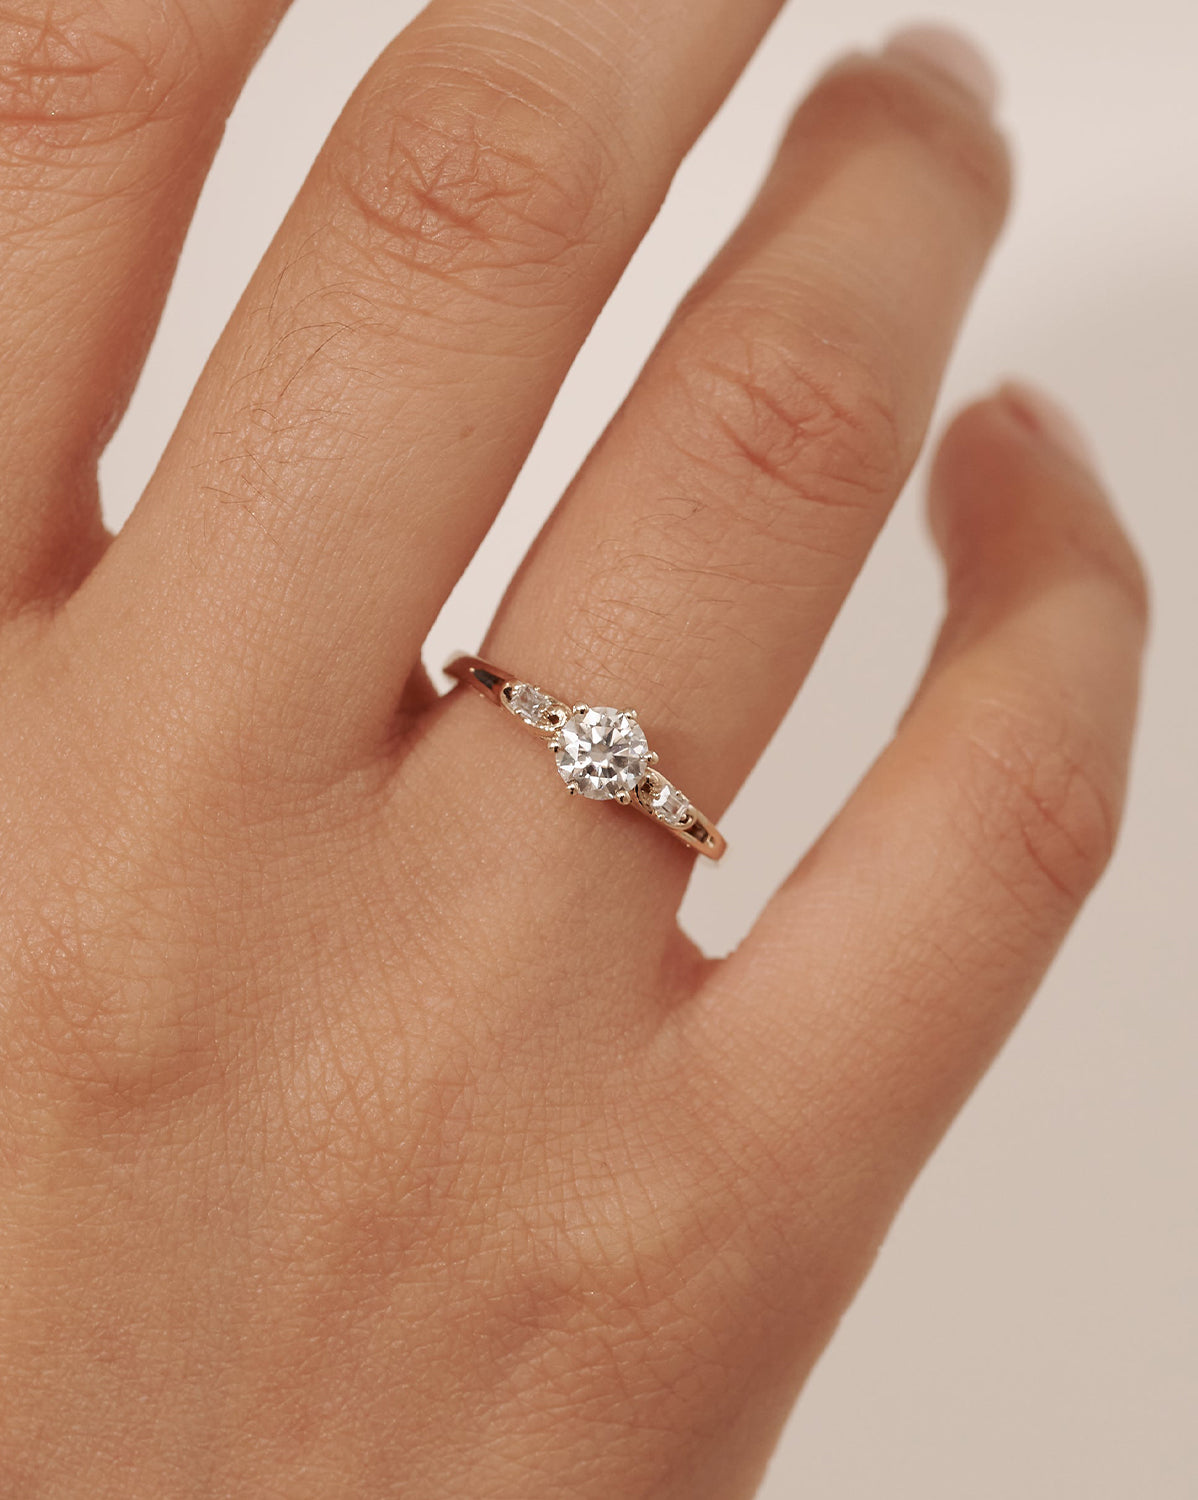 White Gold Nightingale Solitaire Ring